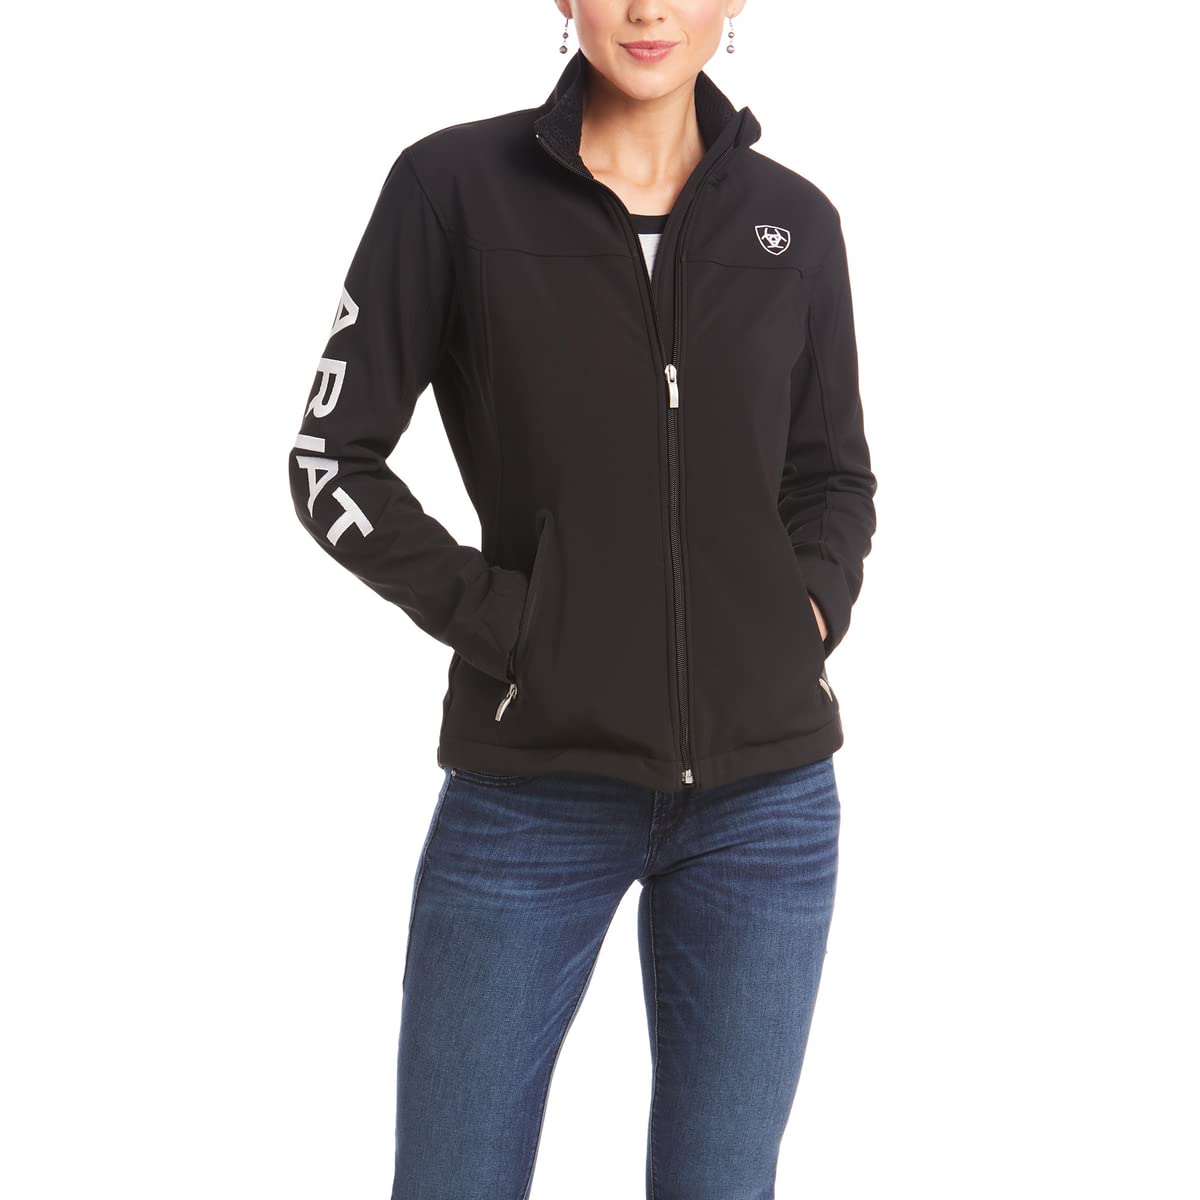 Ariat Women's New Team Softshell Jacket – Wind and Water Resistant Jacket